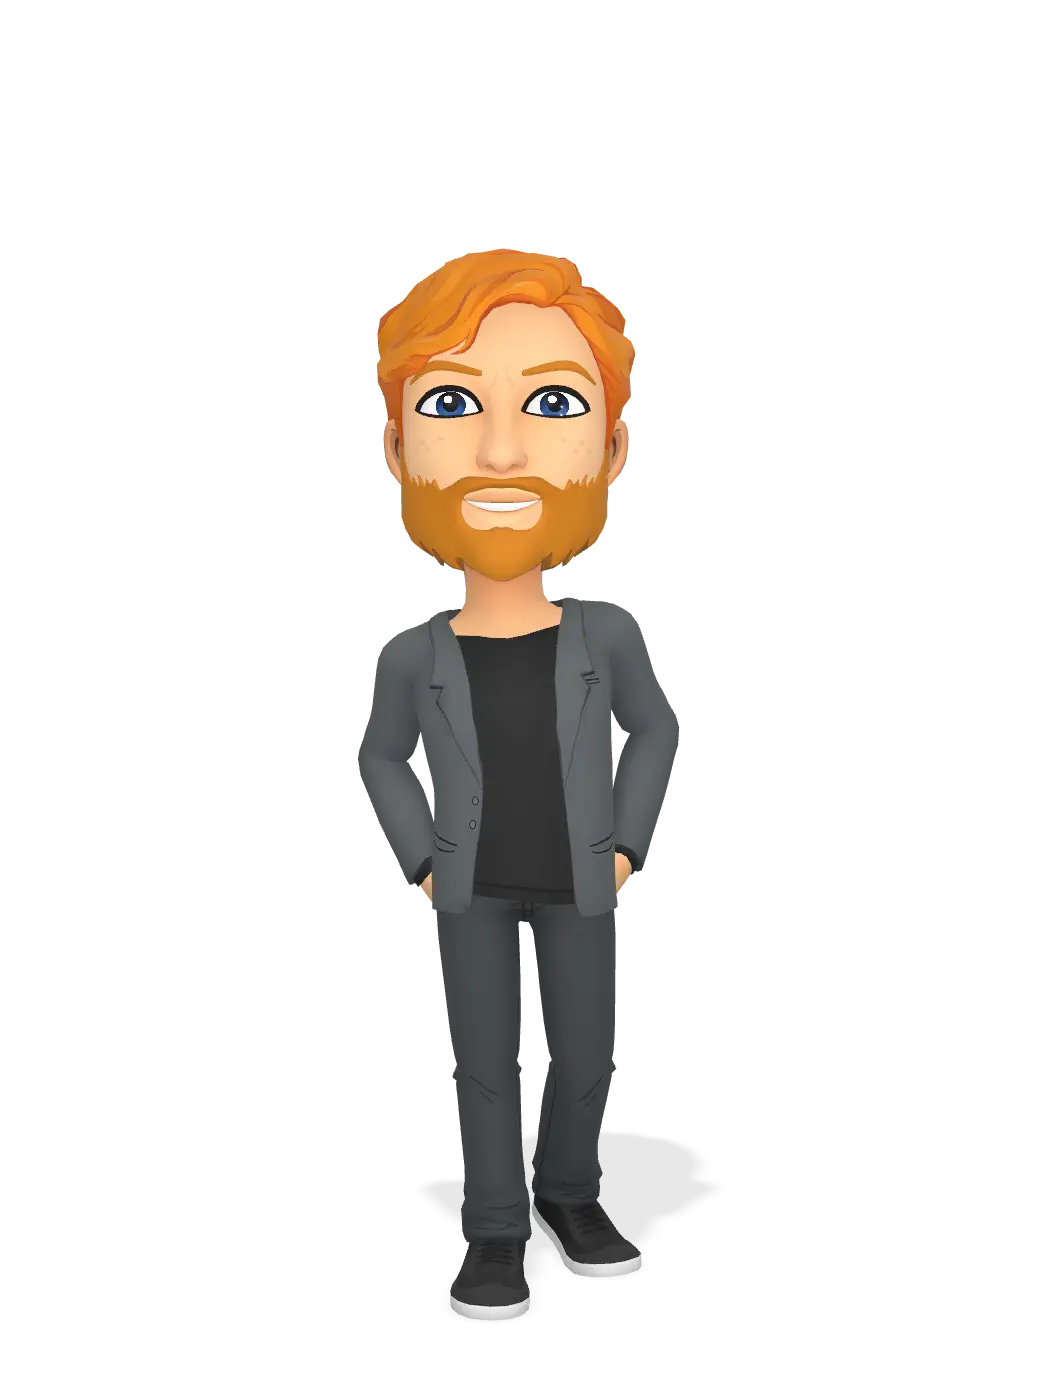 3D Bitmoji for cmagee33